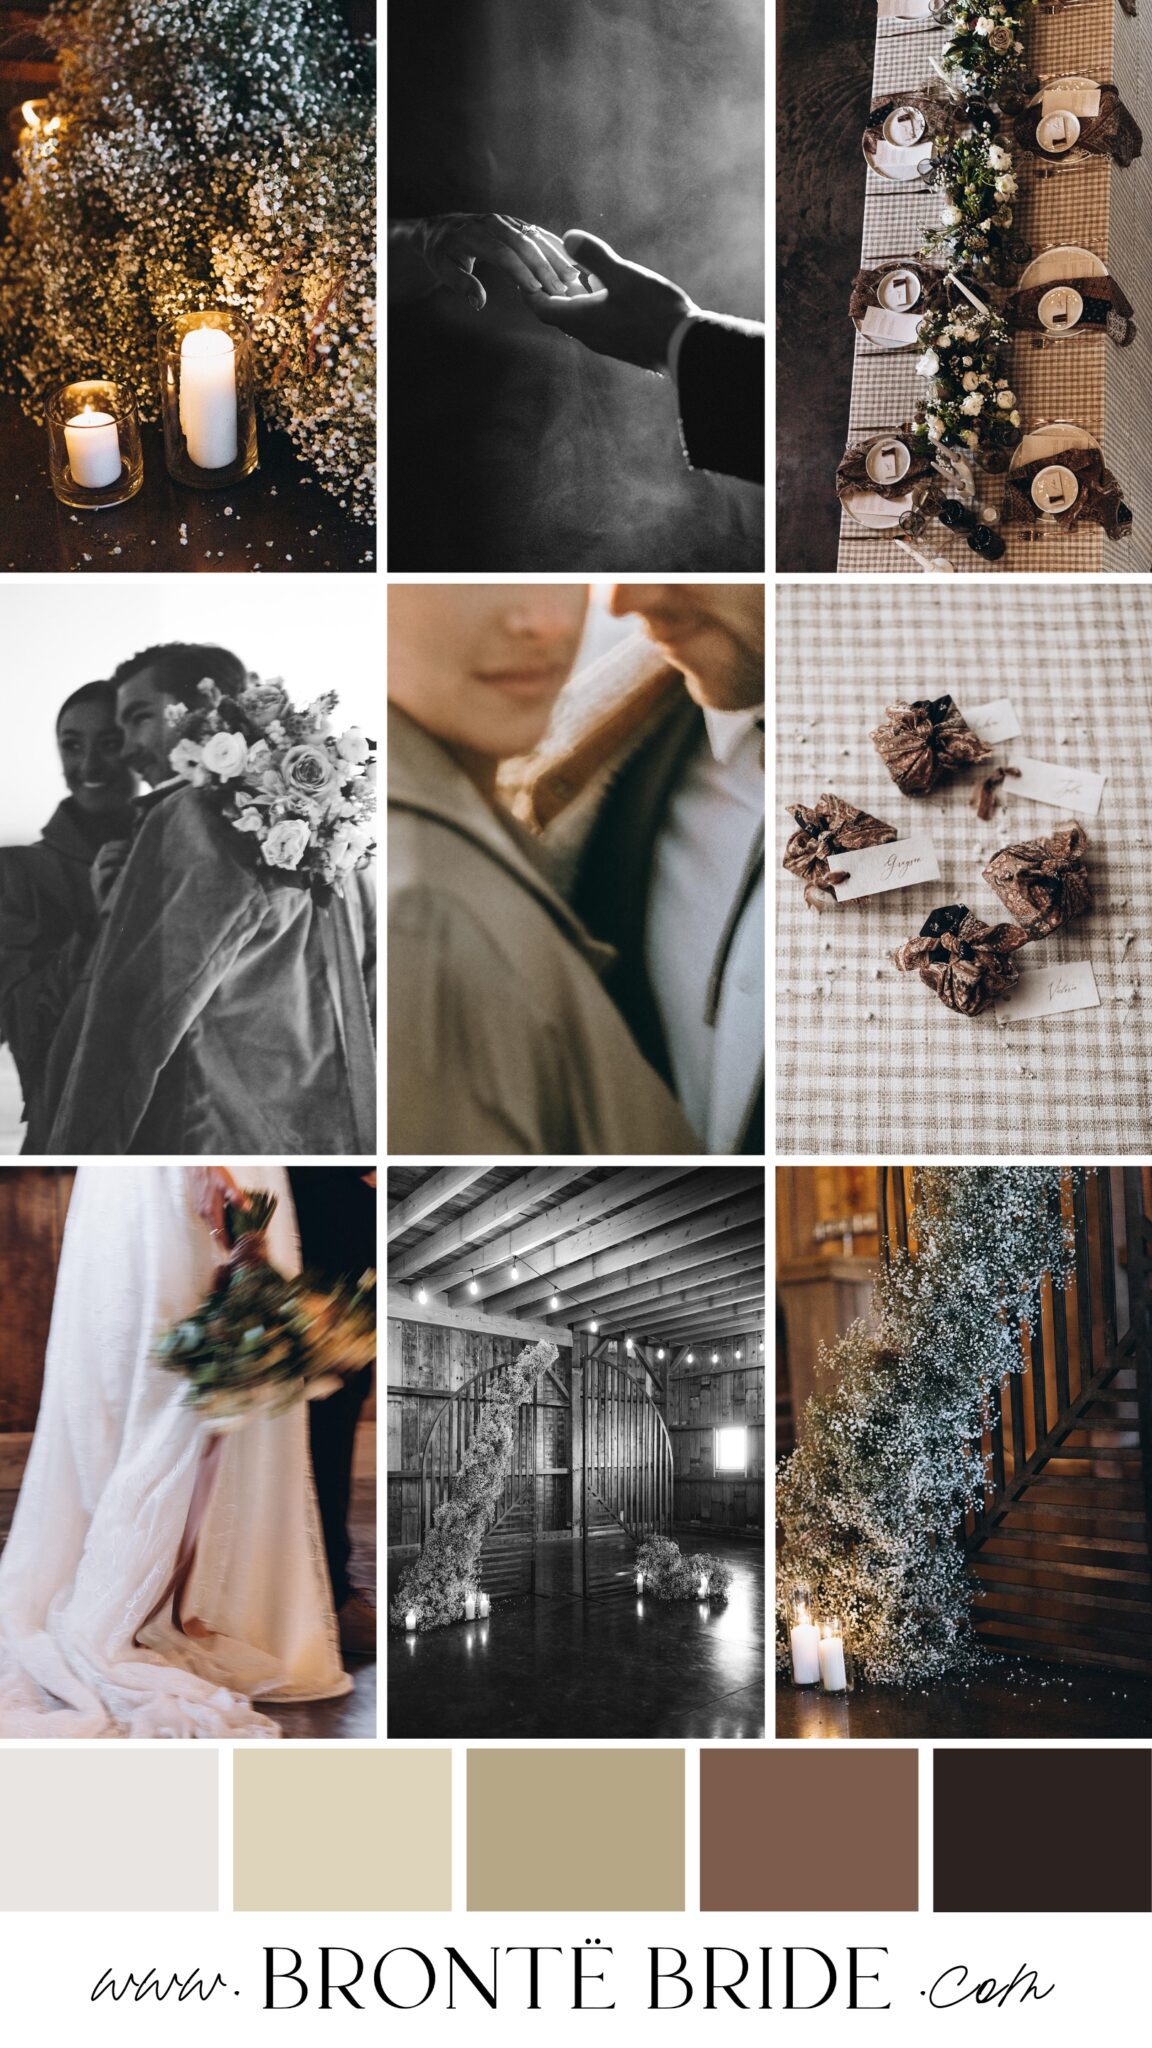 Country Chic Wedding Inspiration & Colour Palette Ideas | Wedding Inspiration & Mood Board from the Bronte Bride Blog; Winter wedding inspiration in Alberta with a romantic neutral contemporary colour scheme of taupe, cream, tan, brown, and black. modern vintage colour palette for a vintage inspired wedding